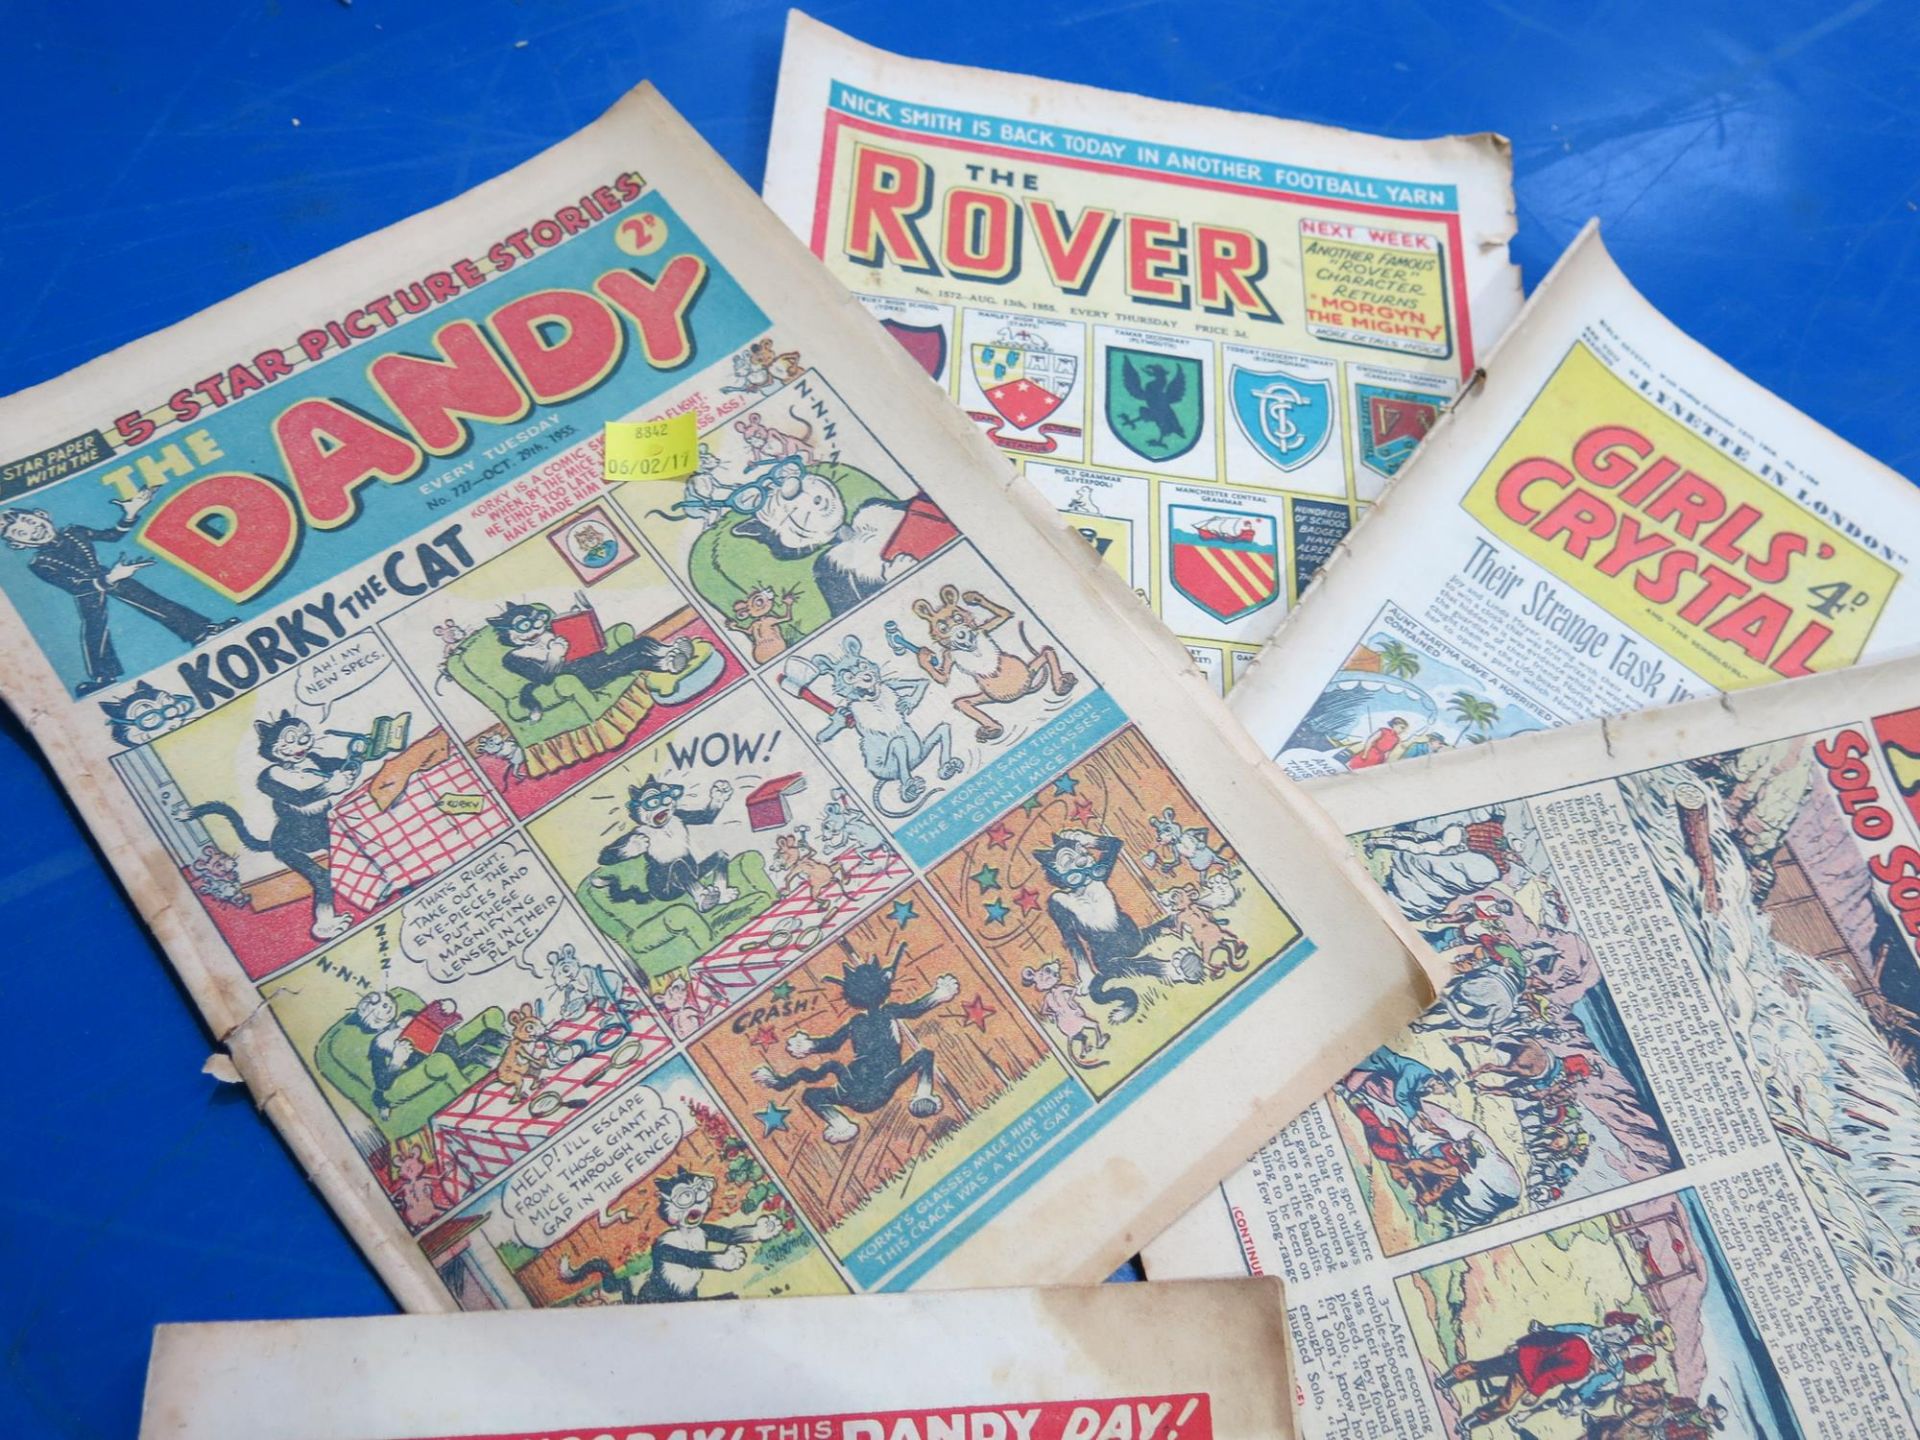 A selection of Beano and Dandy comics from the 1950s (Beano issues from between 640-925, Dandy 663-